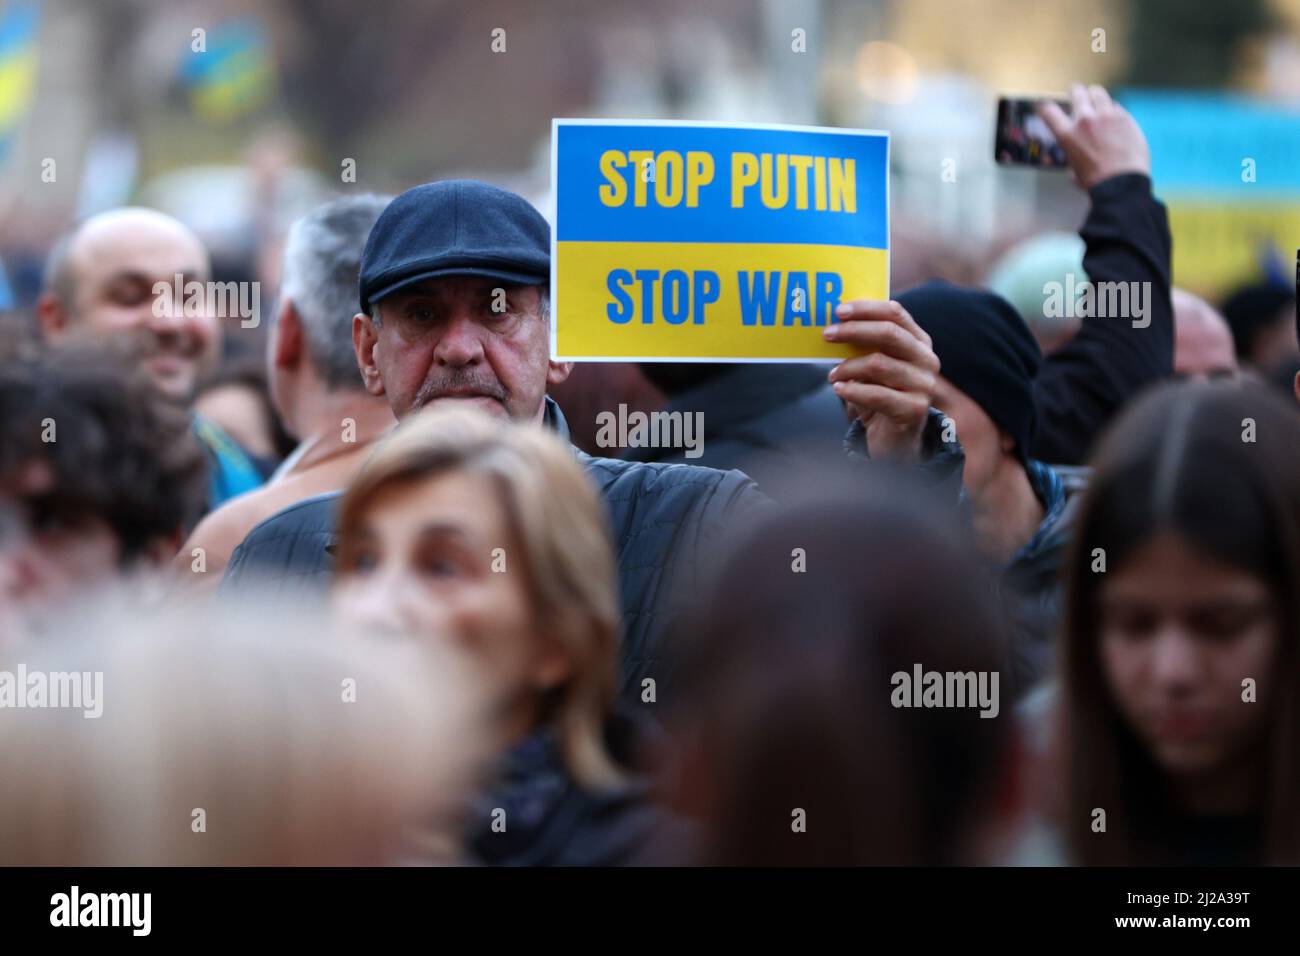 Sofia, Bulgaria - 24 March 2022: A man holds protest sign saying 'Stop Putin Stop War' during a demonstration in support of Ukraine one month after Ru Stock Photo